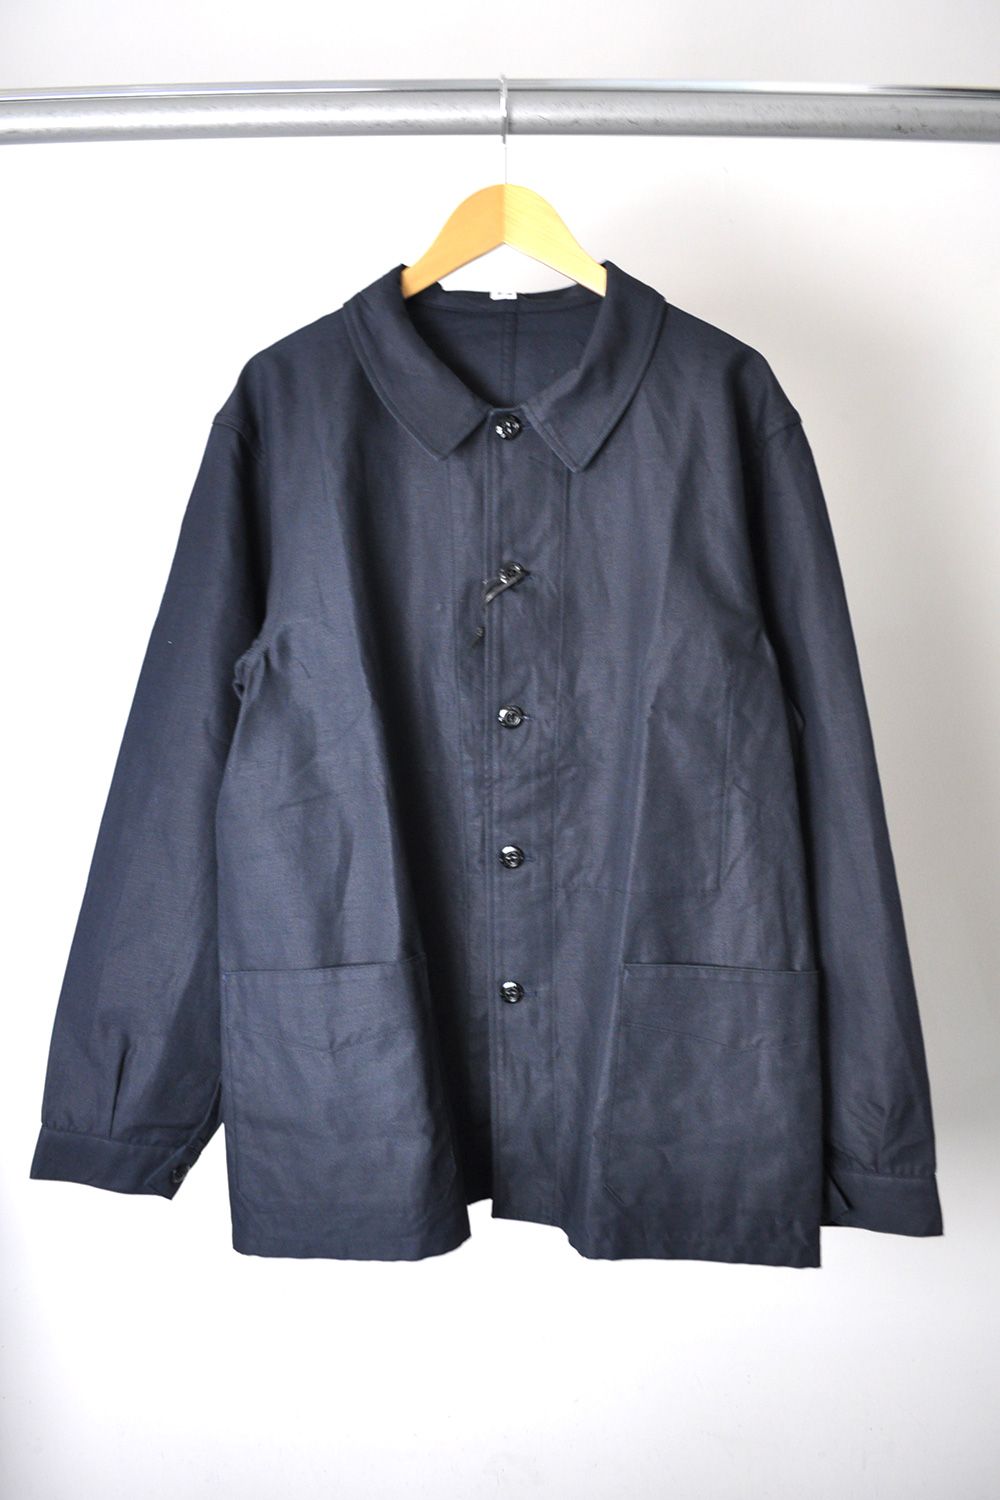 Ets.MATERIAUX - French Coveralls / NAVY | Stripe Online Store